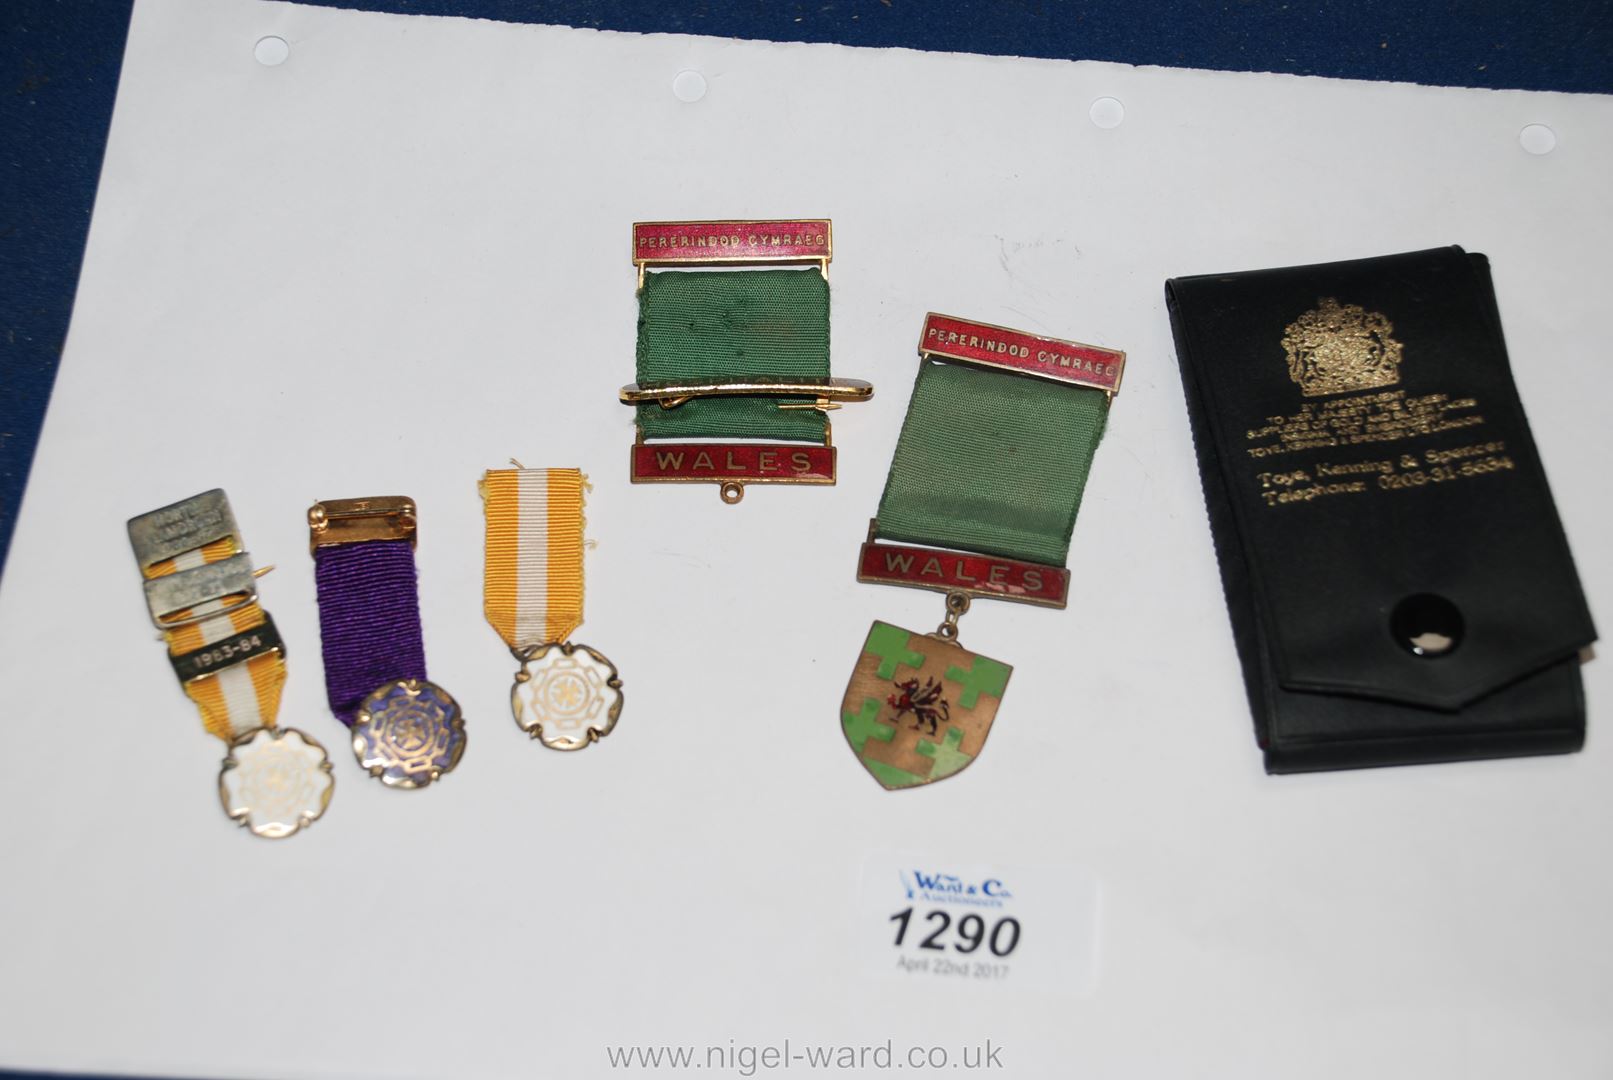 Three Silver gilt council Medals and other insignia